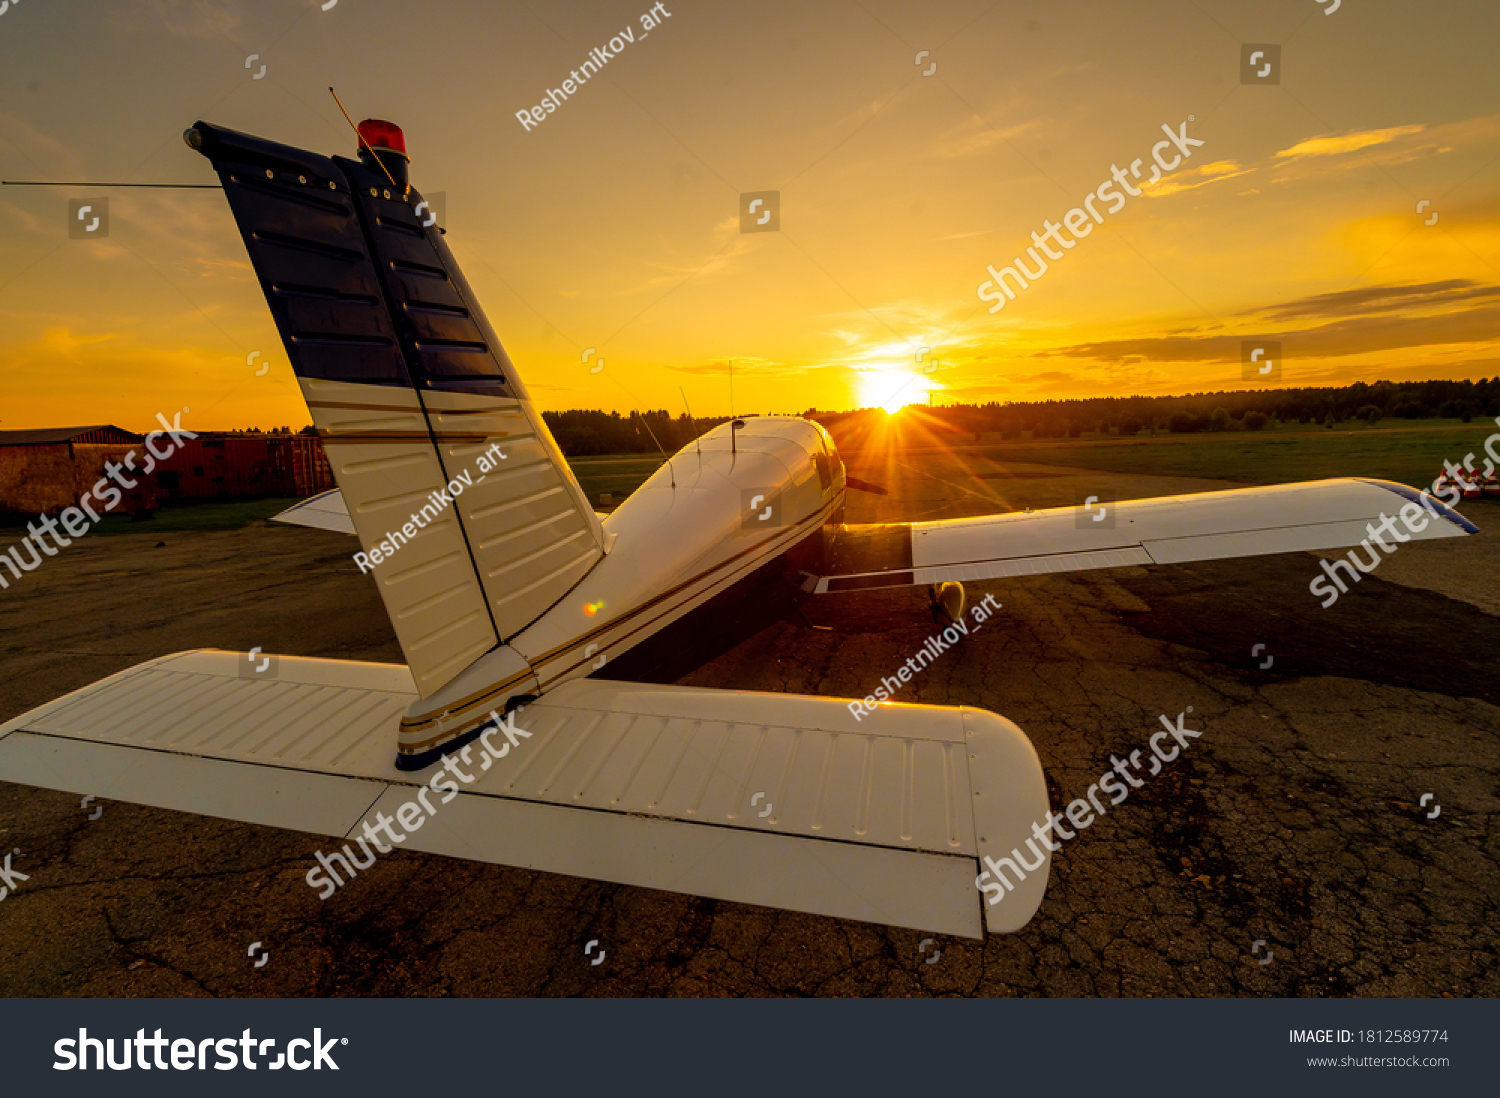 Quadruple aircraft parked at a private airfield. Rear view of a plane with a propeller on a sunset background. #1812589774